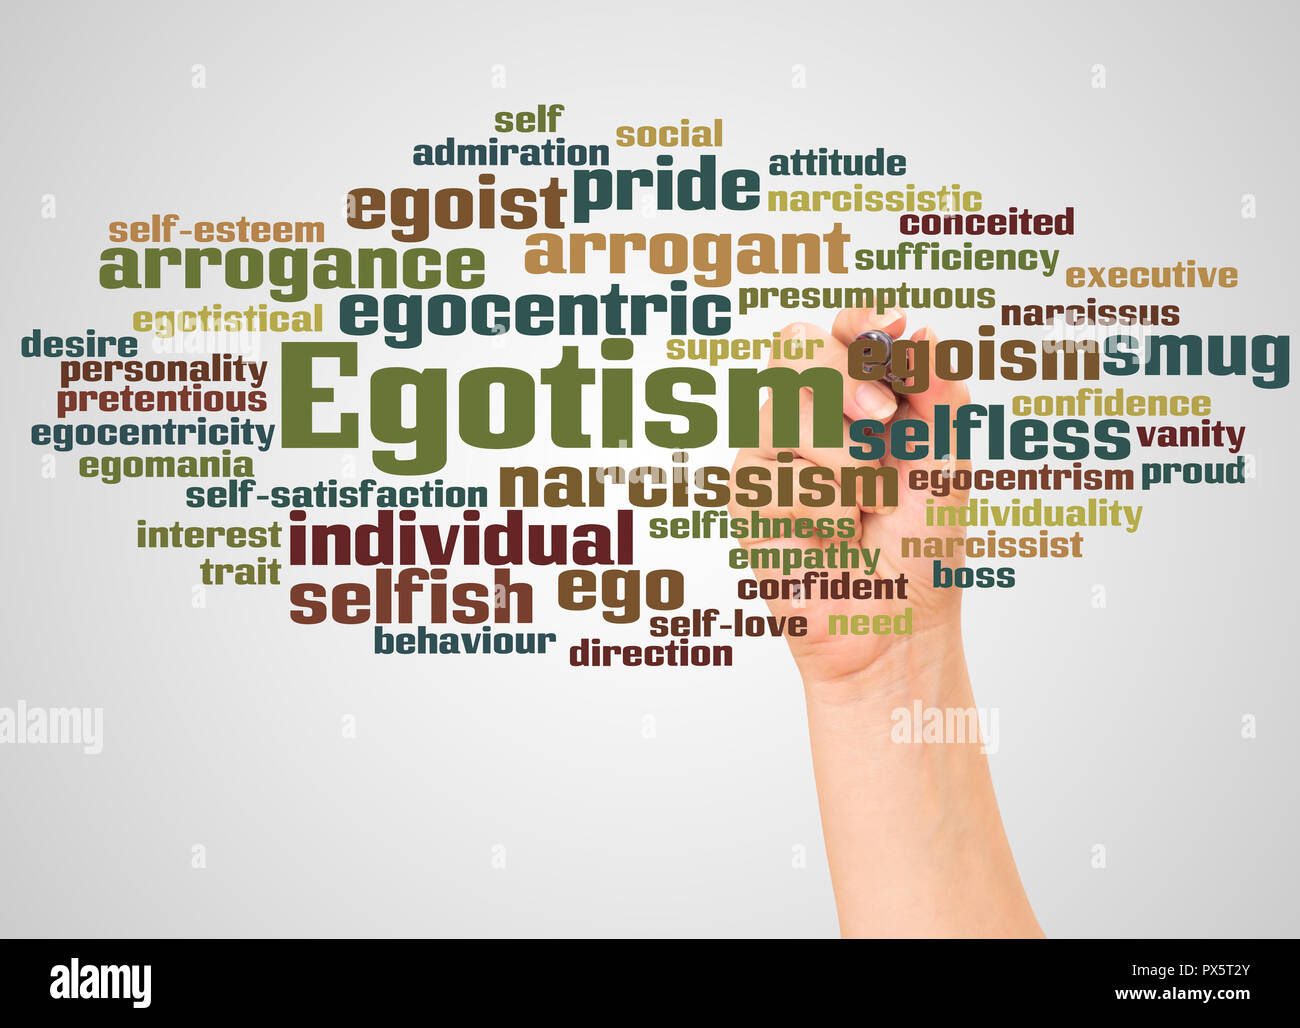 Egotism word cloud and hand with marker concept on gradient background. Stock Photo